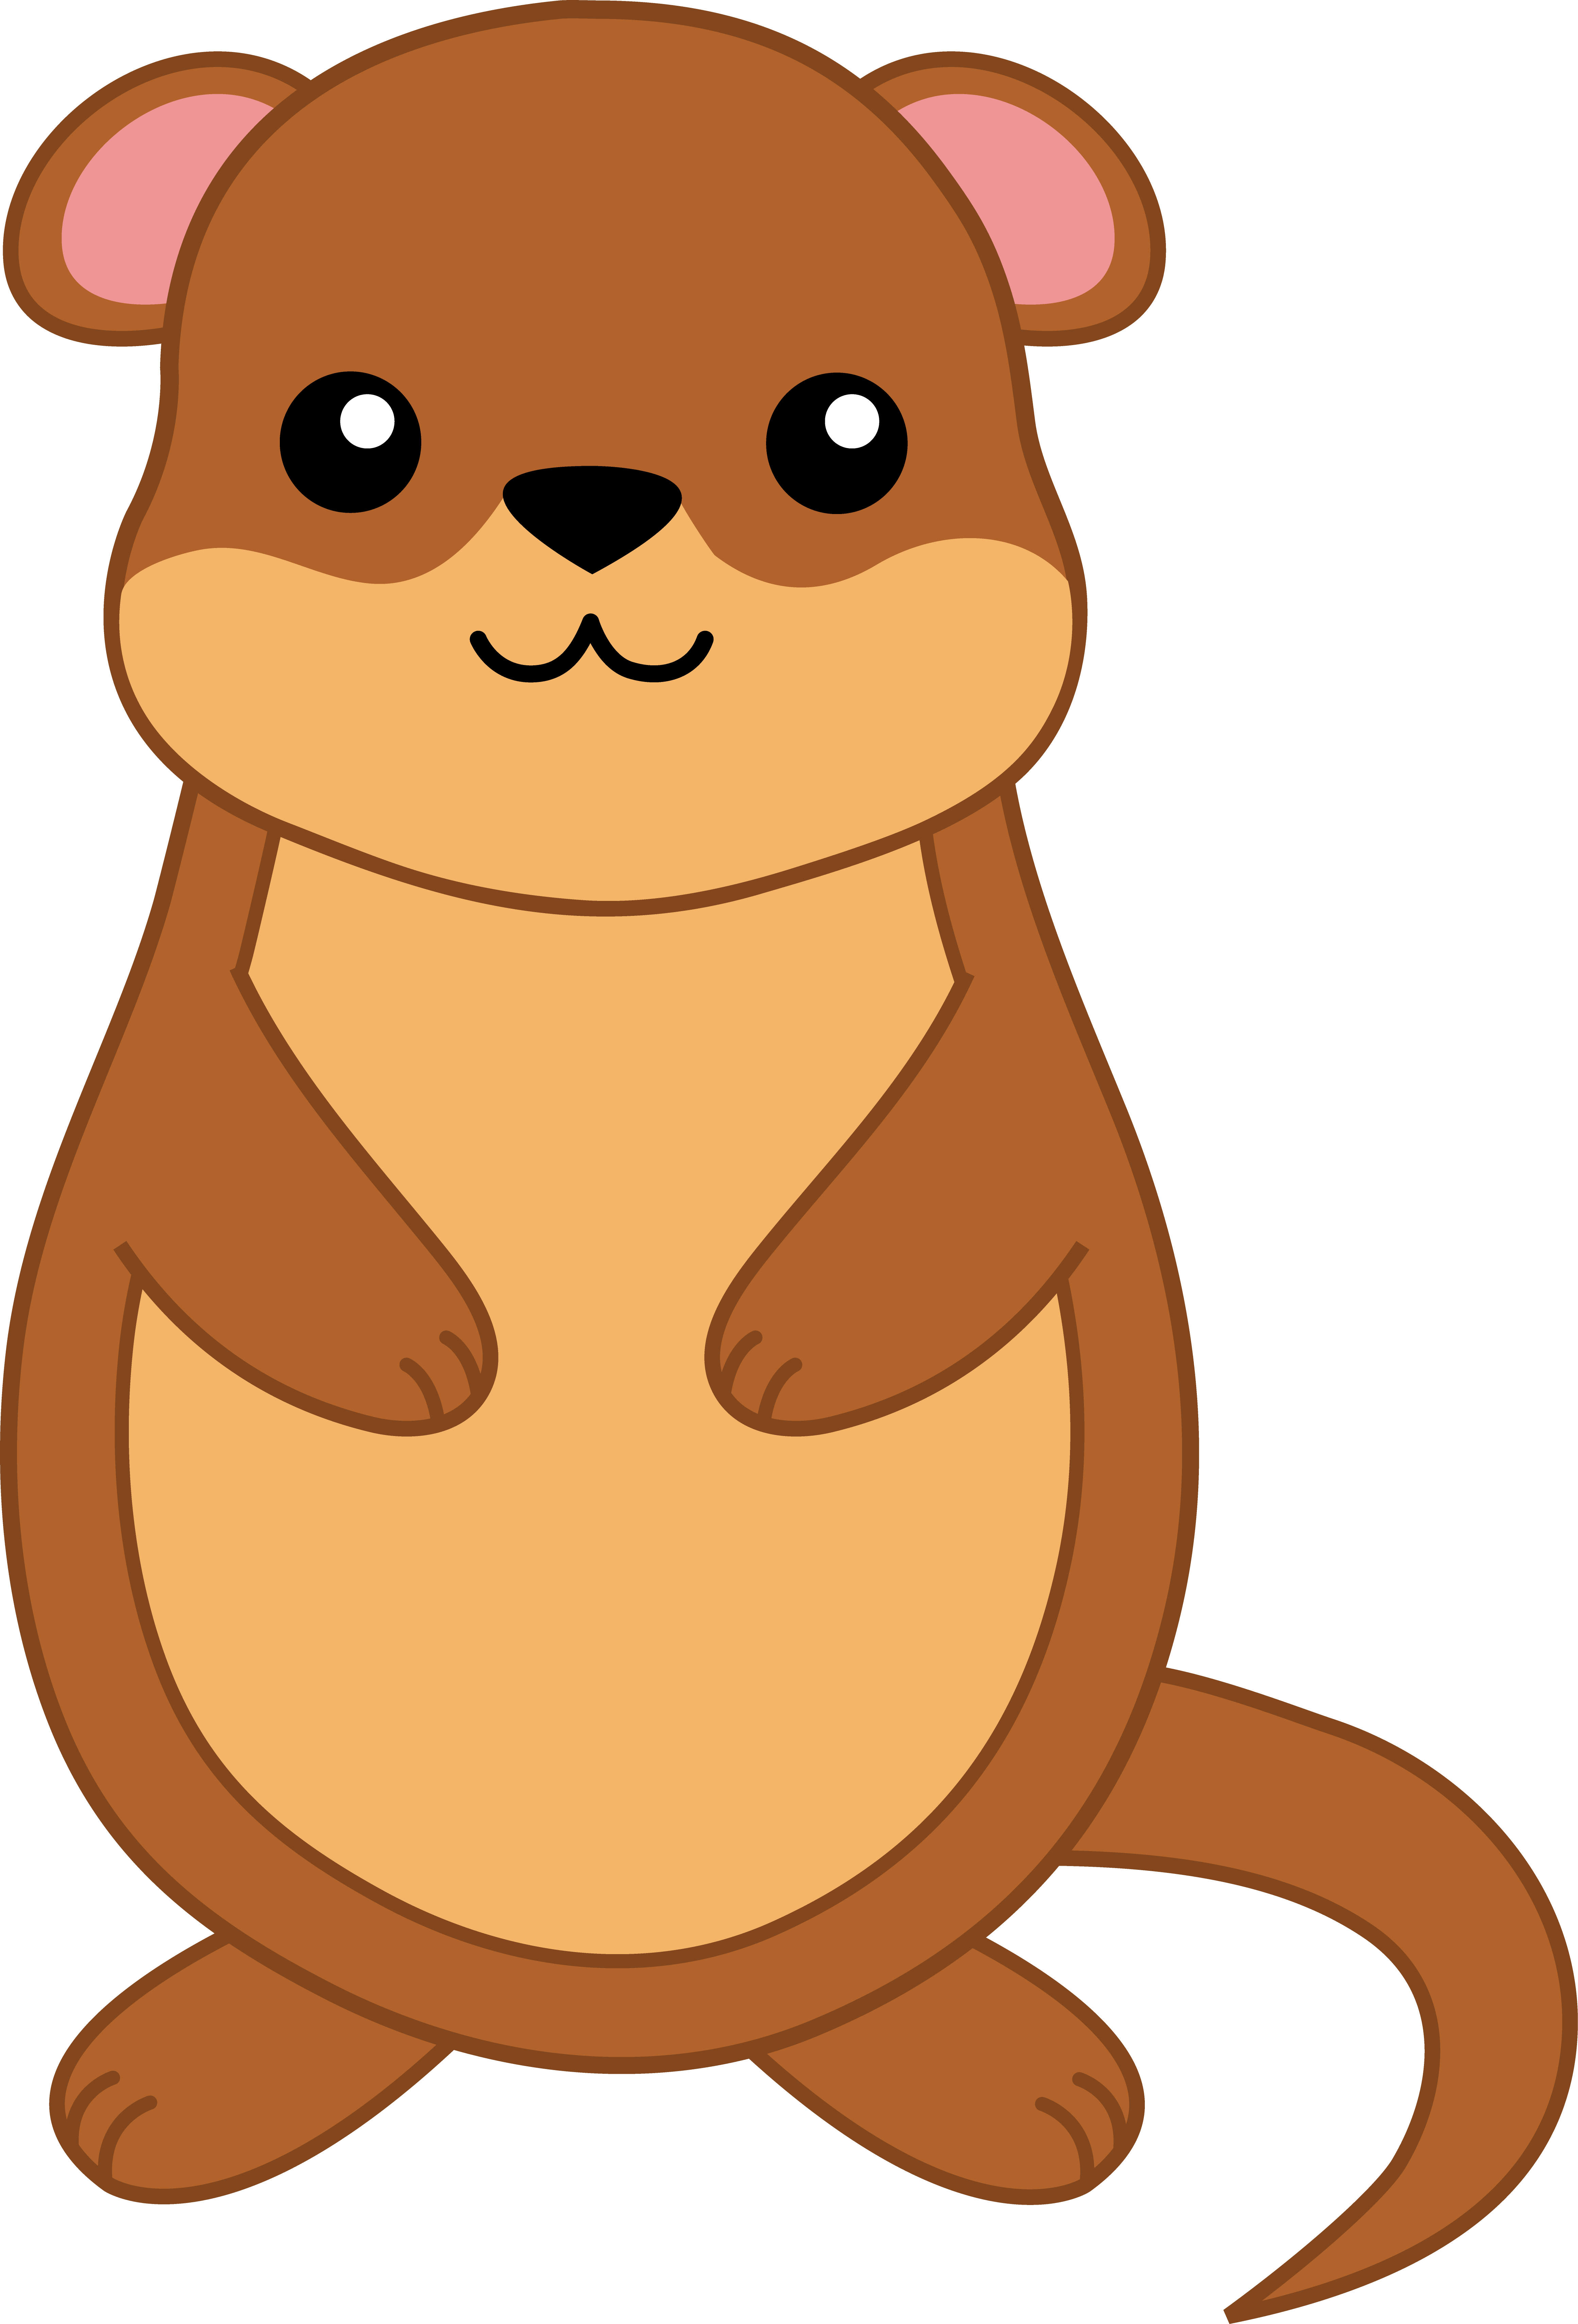 Woodchuck 20clipart - Free Clipart Images